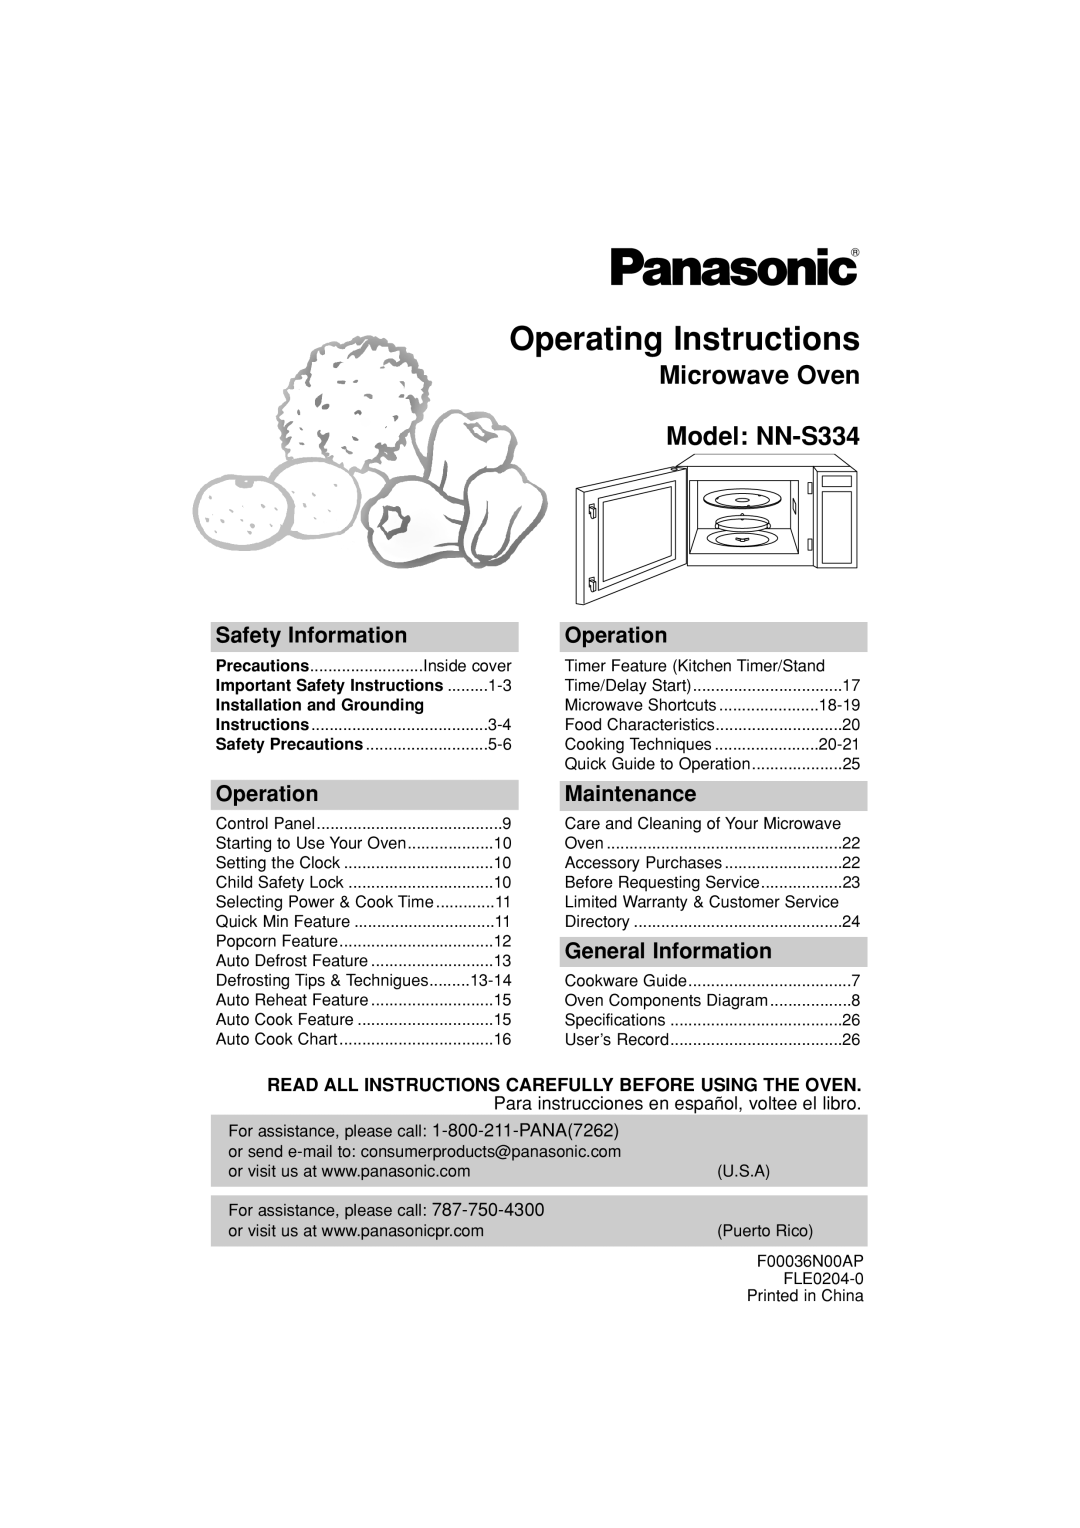 Panasonic important safety instructions Operating Instructions, Microwave Oven Model: NN-S334, Safety Information 